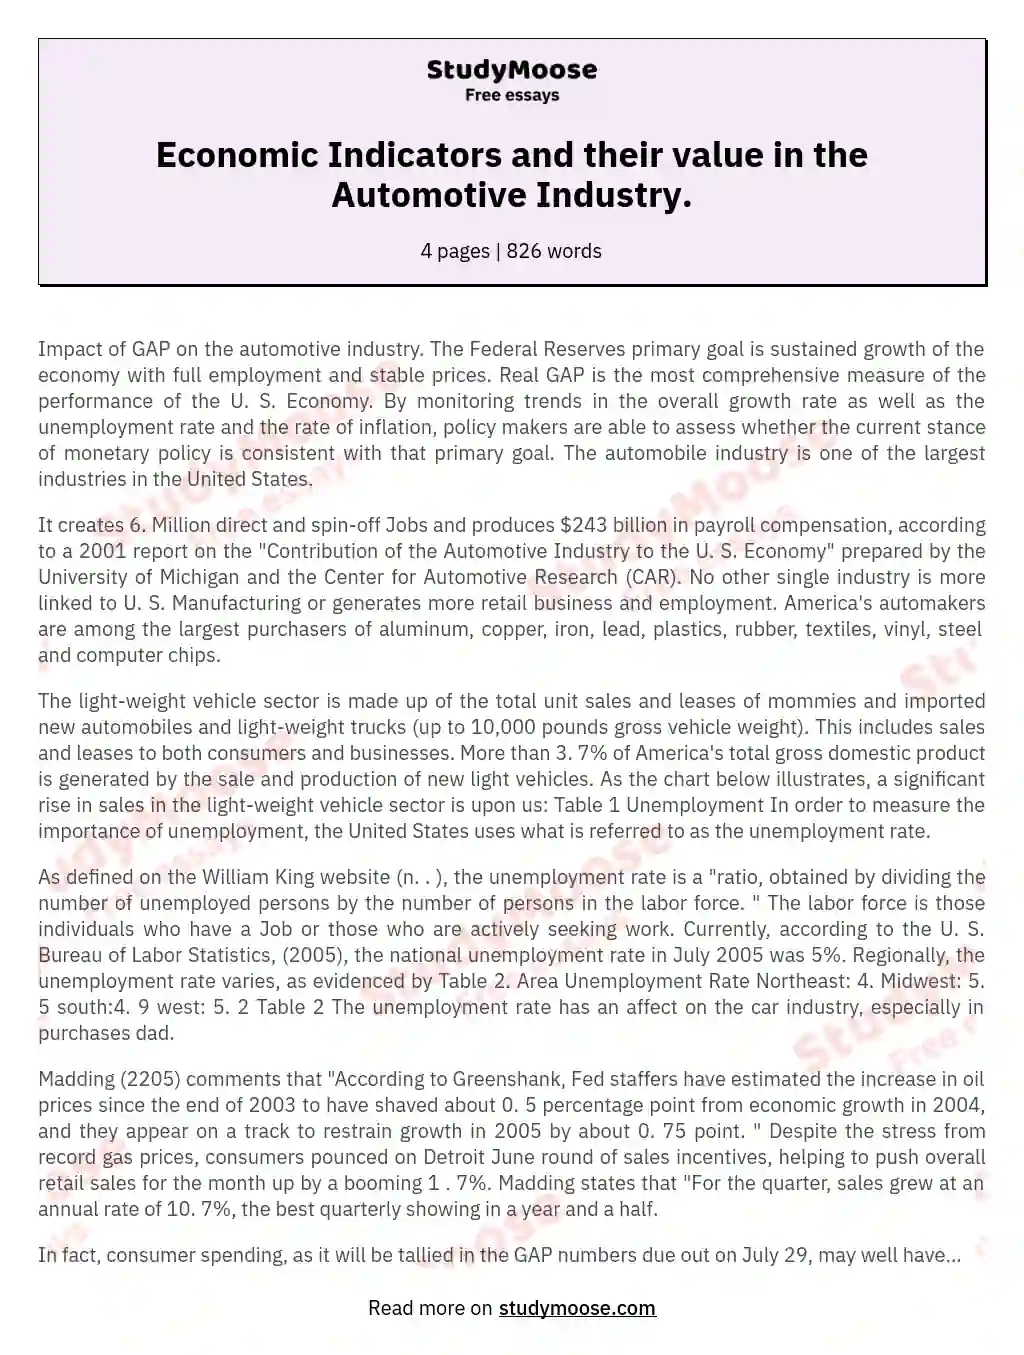 Economic Indicators and their value in the Automotive Industry.